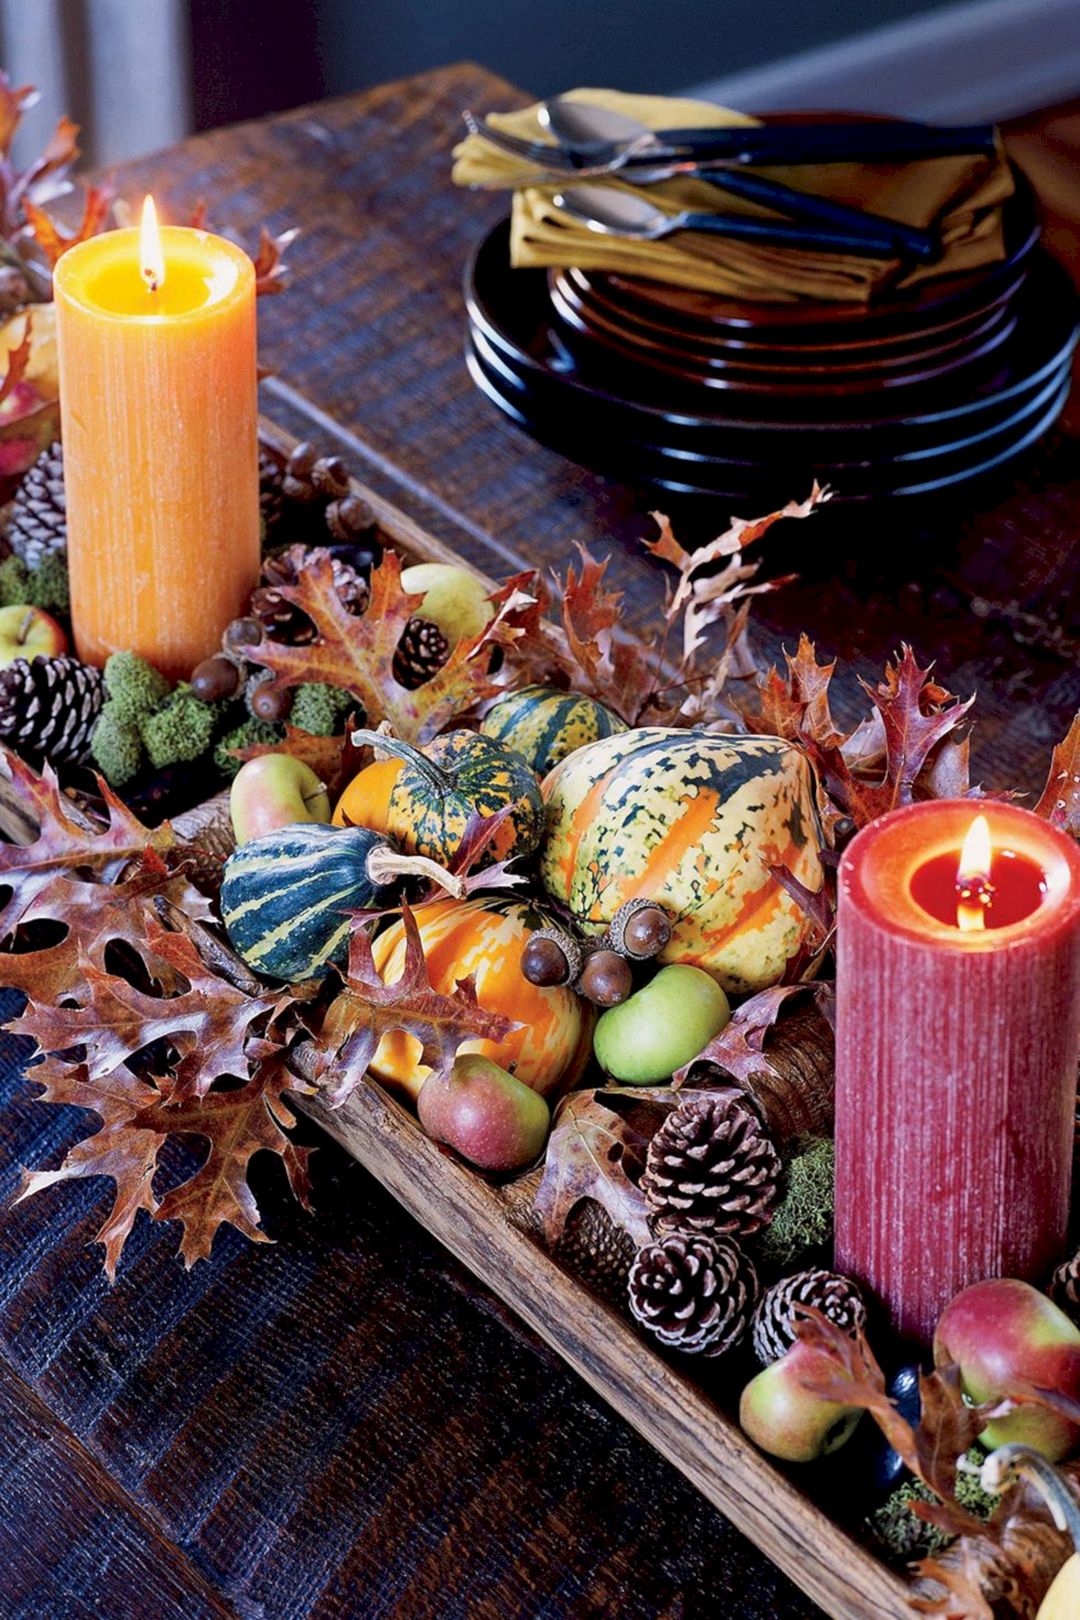 Harvest Themed Centerpiece from Countryliving